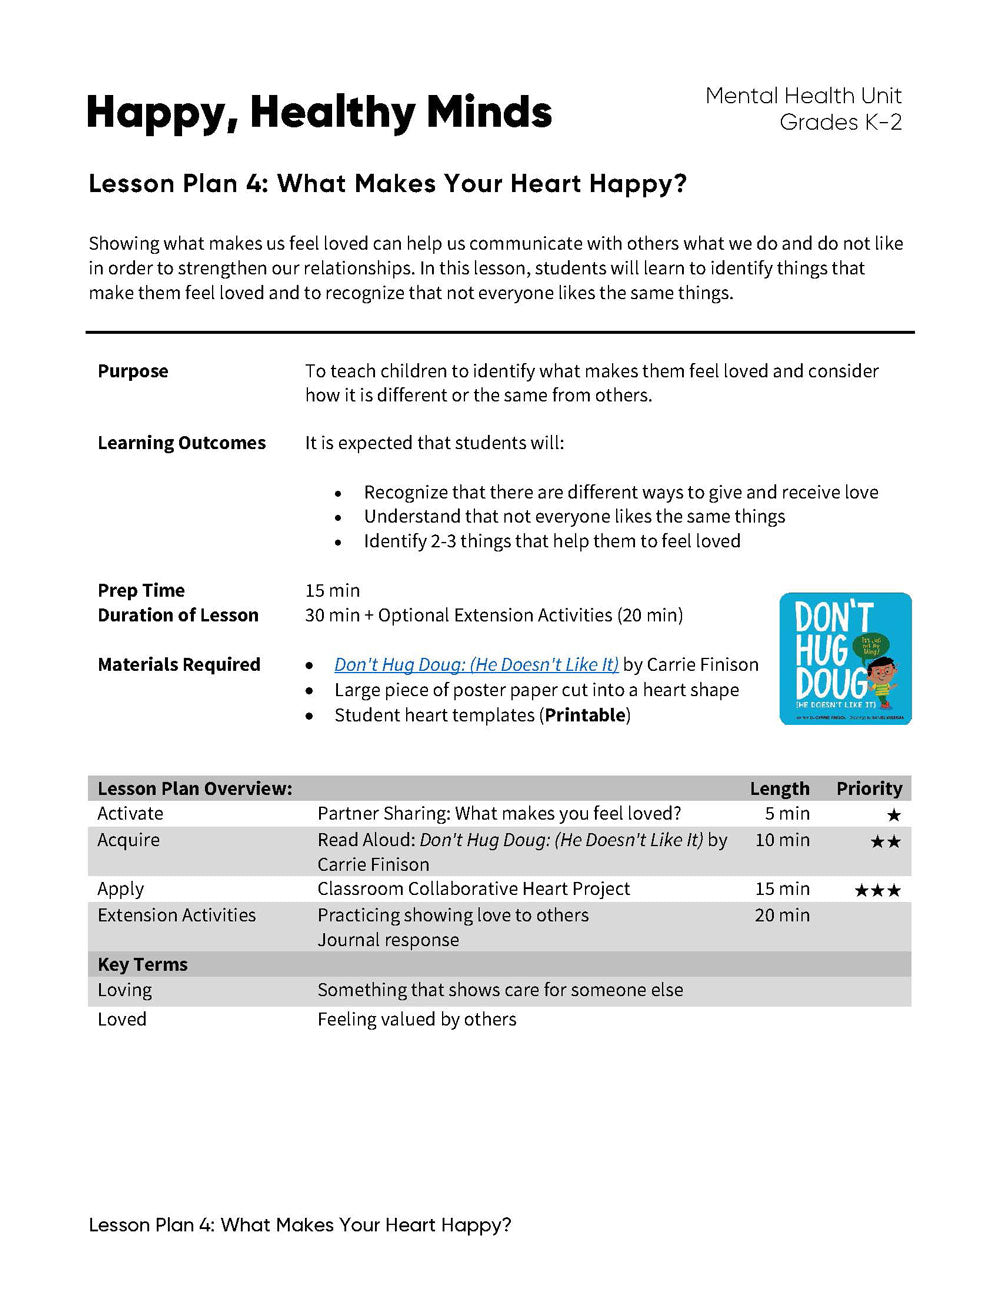 Lesson Plan 4: What Makes Your Heart Happy?